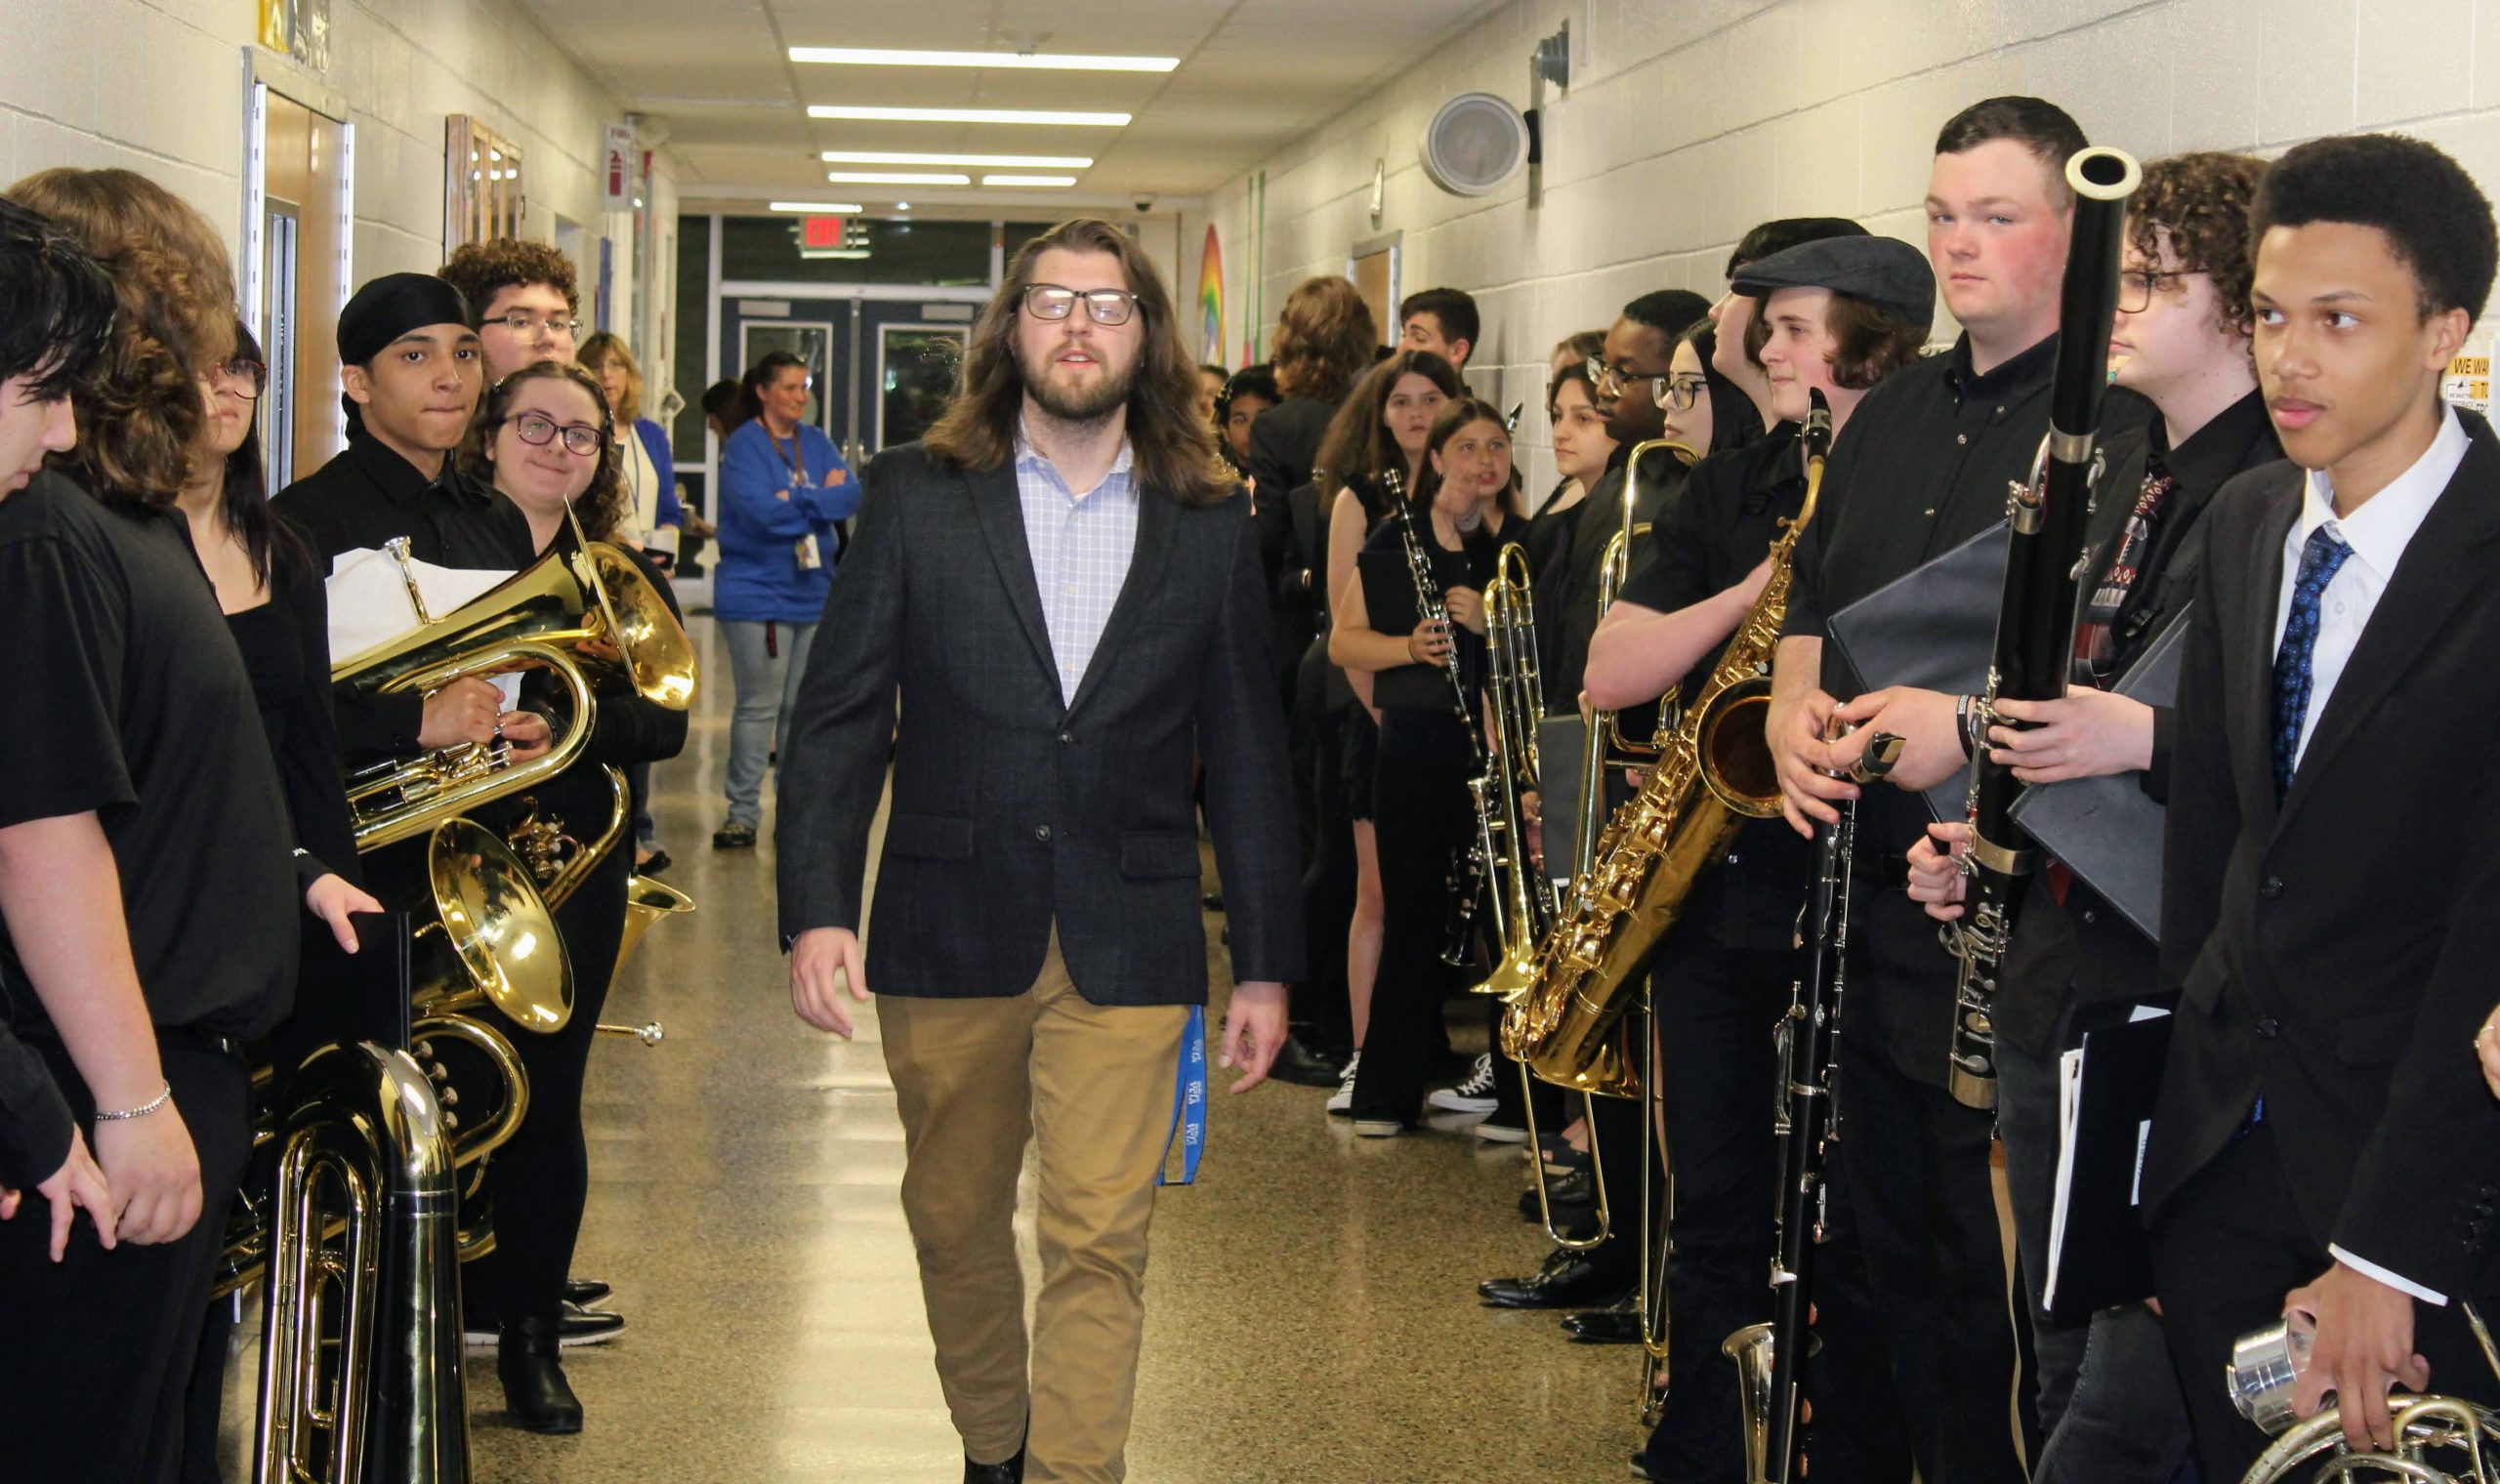 Music Teacher, Mr. Walker, strides down the hallway lined with band members on his way into the Spring concert